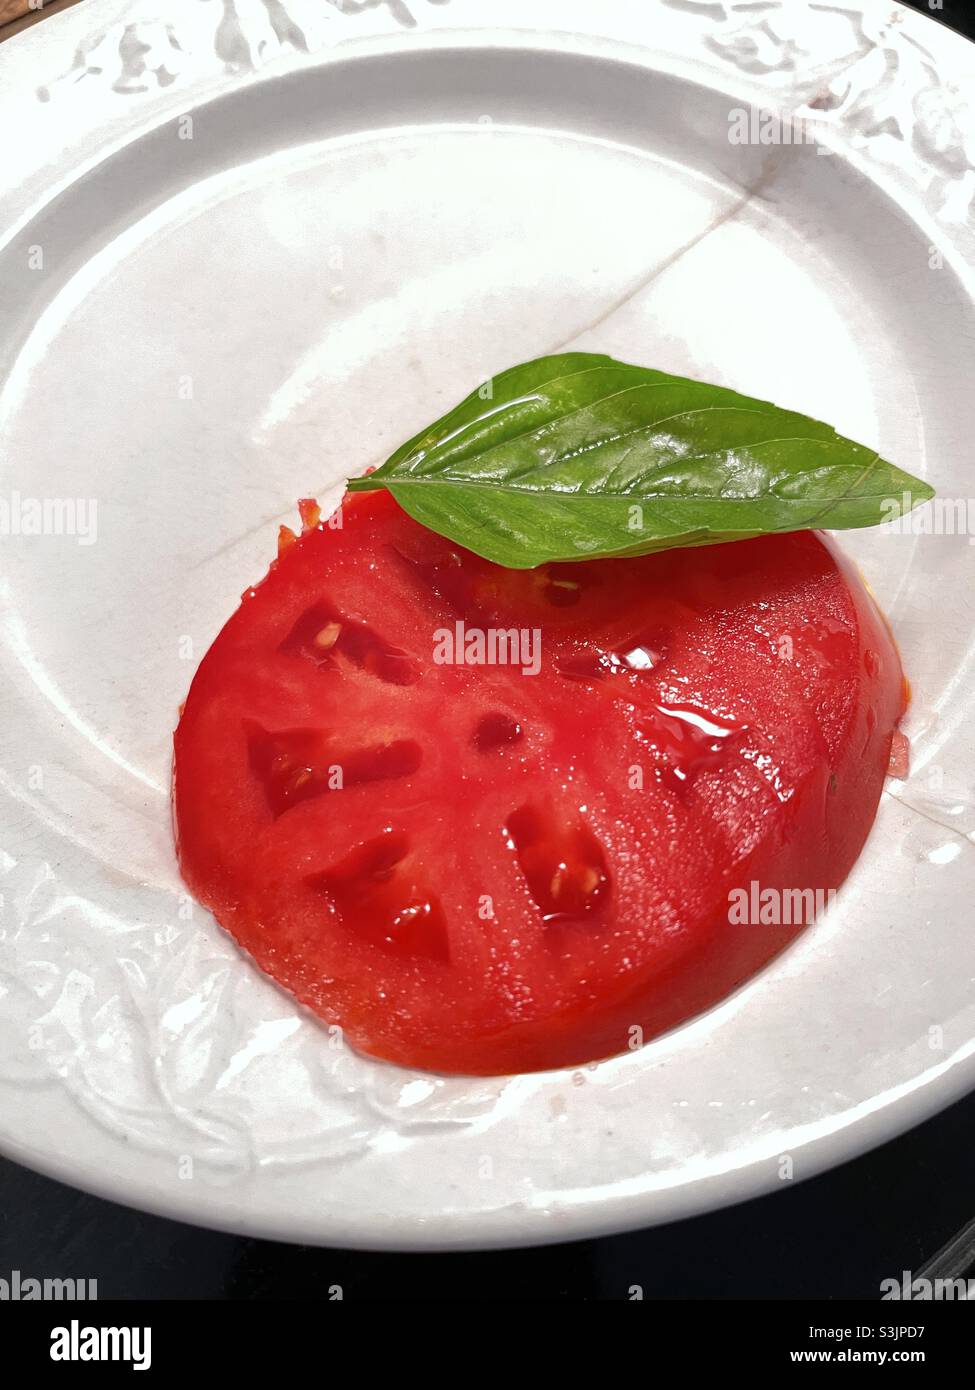 Tomato on plate with basil leaf Stock Photo